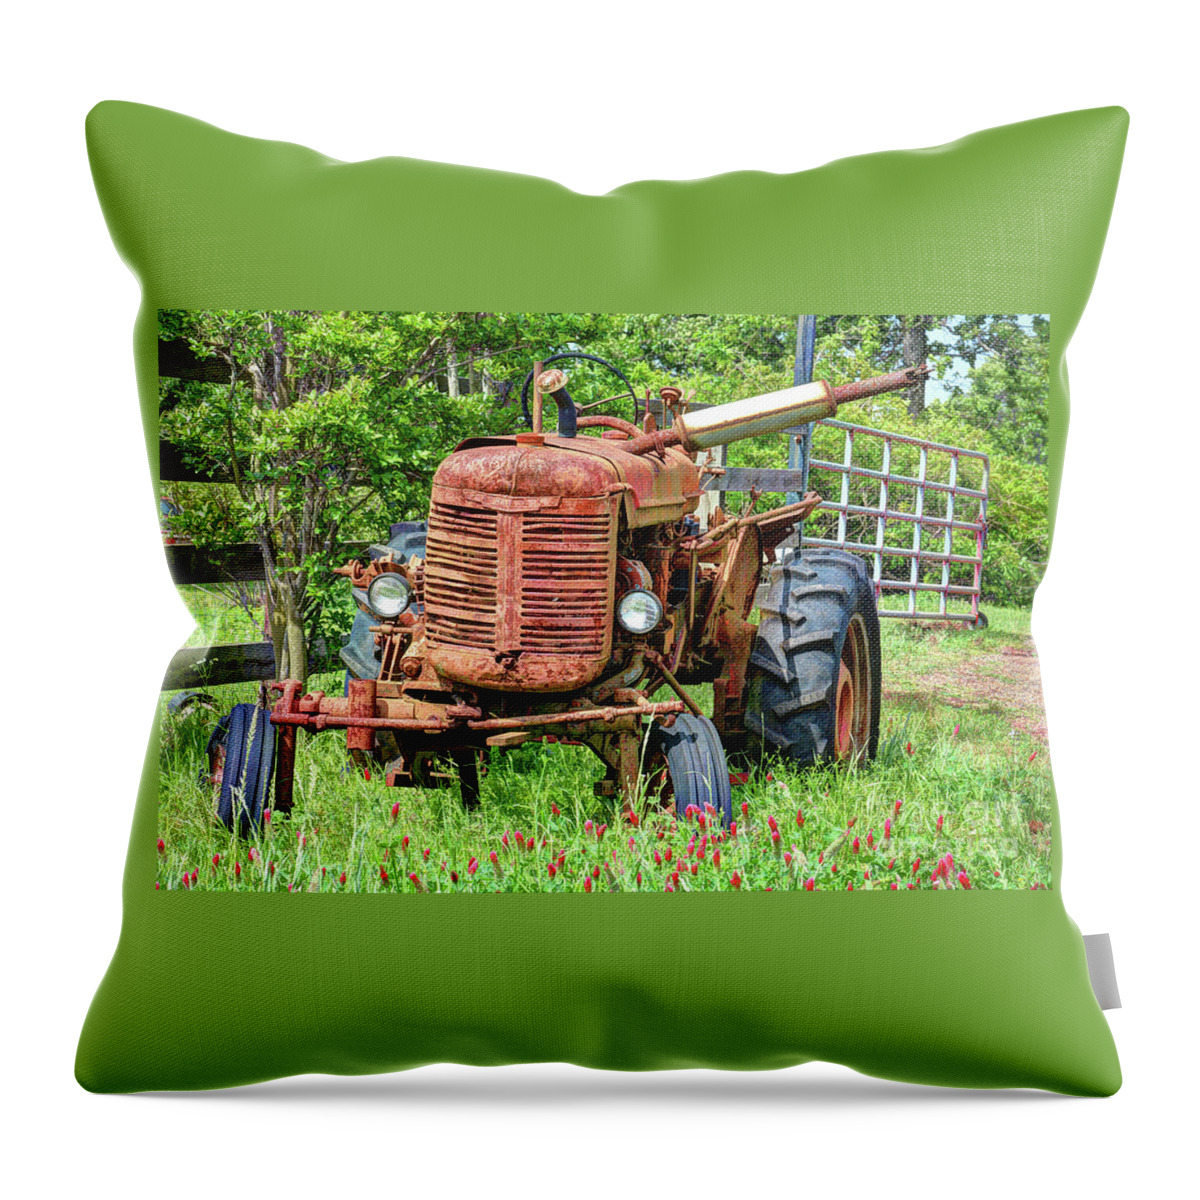 Agriculture Throw Pillow featuring the photograph Old Rusty Tractor by Savannah Gibbs